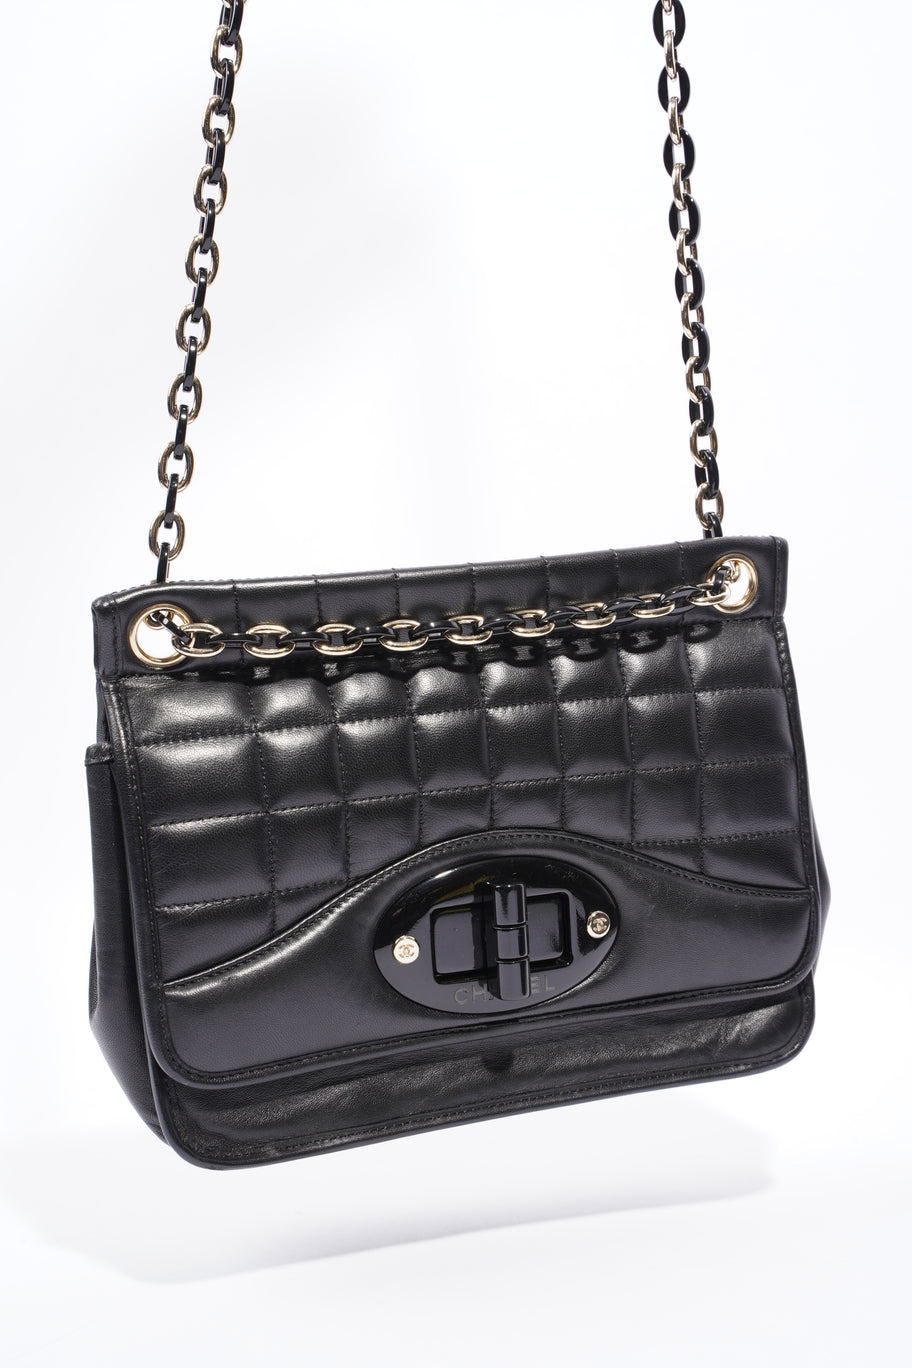 Chain Flap Black Leather Image 13